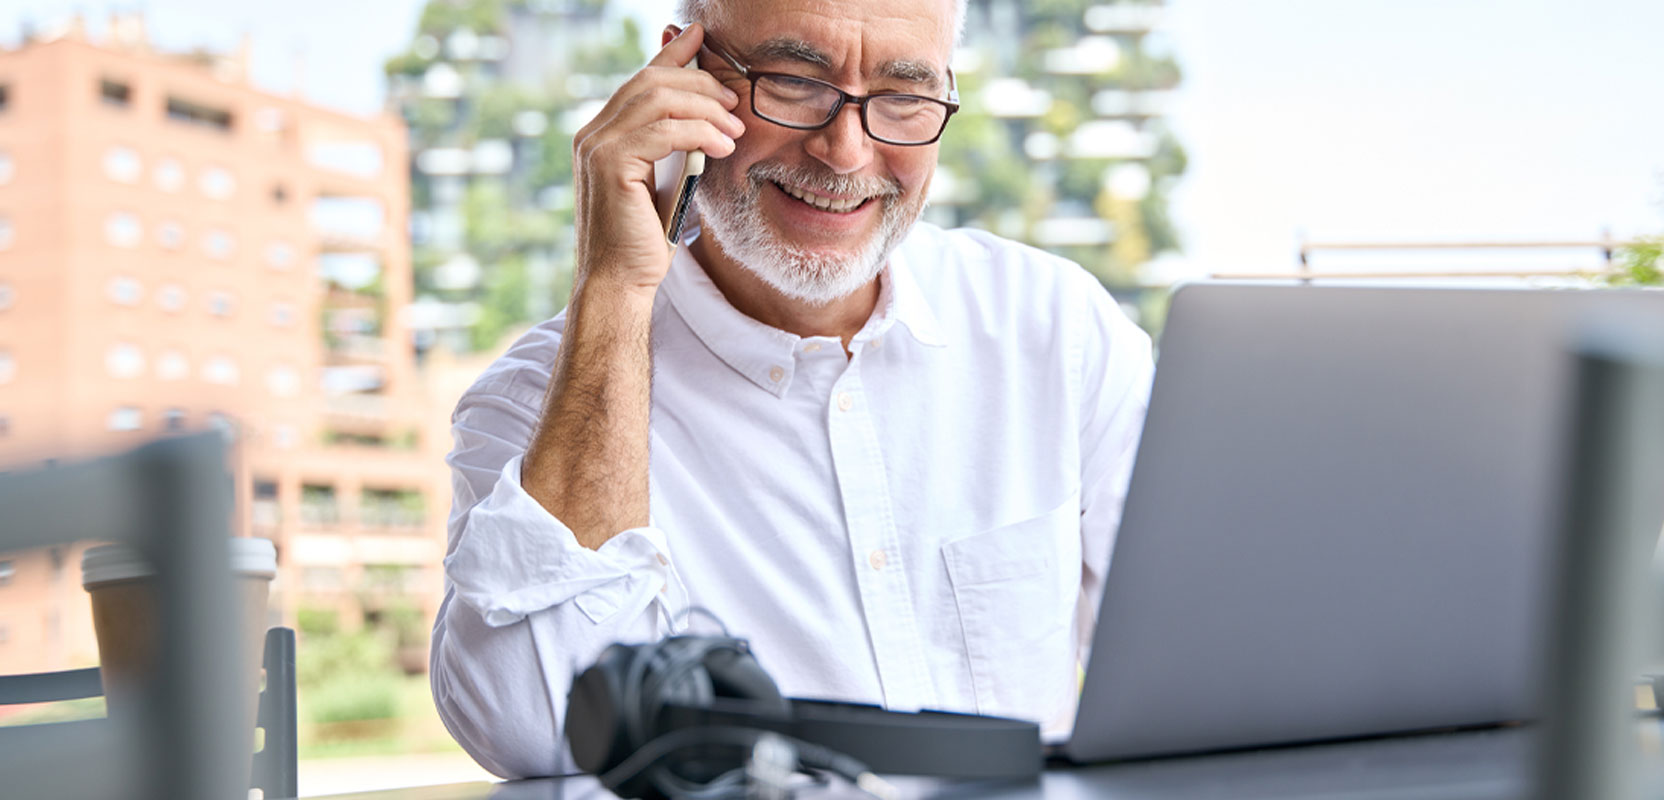 Bearded older man on the phone working as a part-time customer service representative